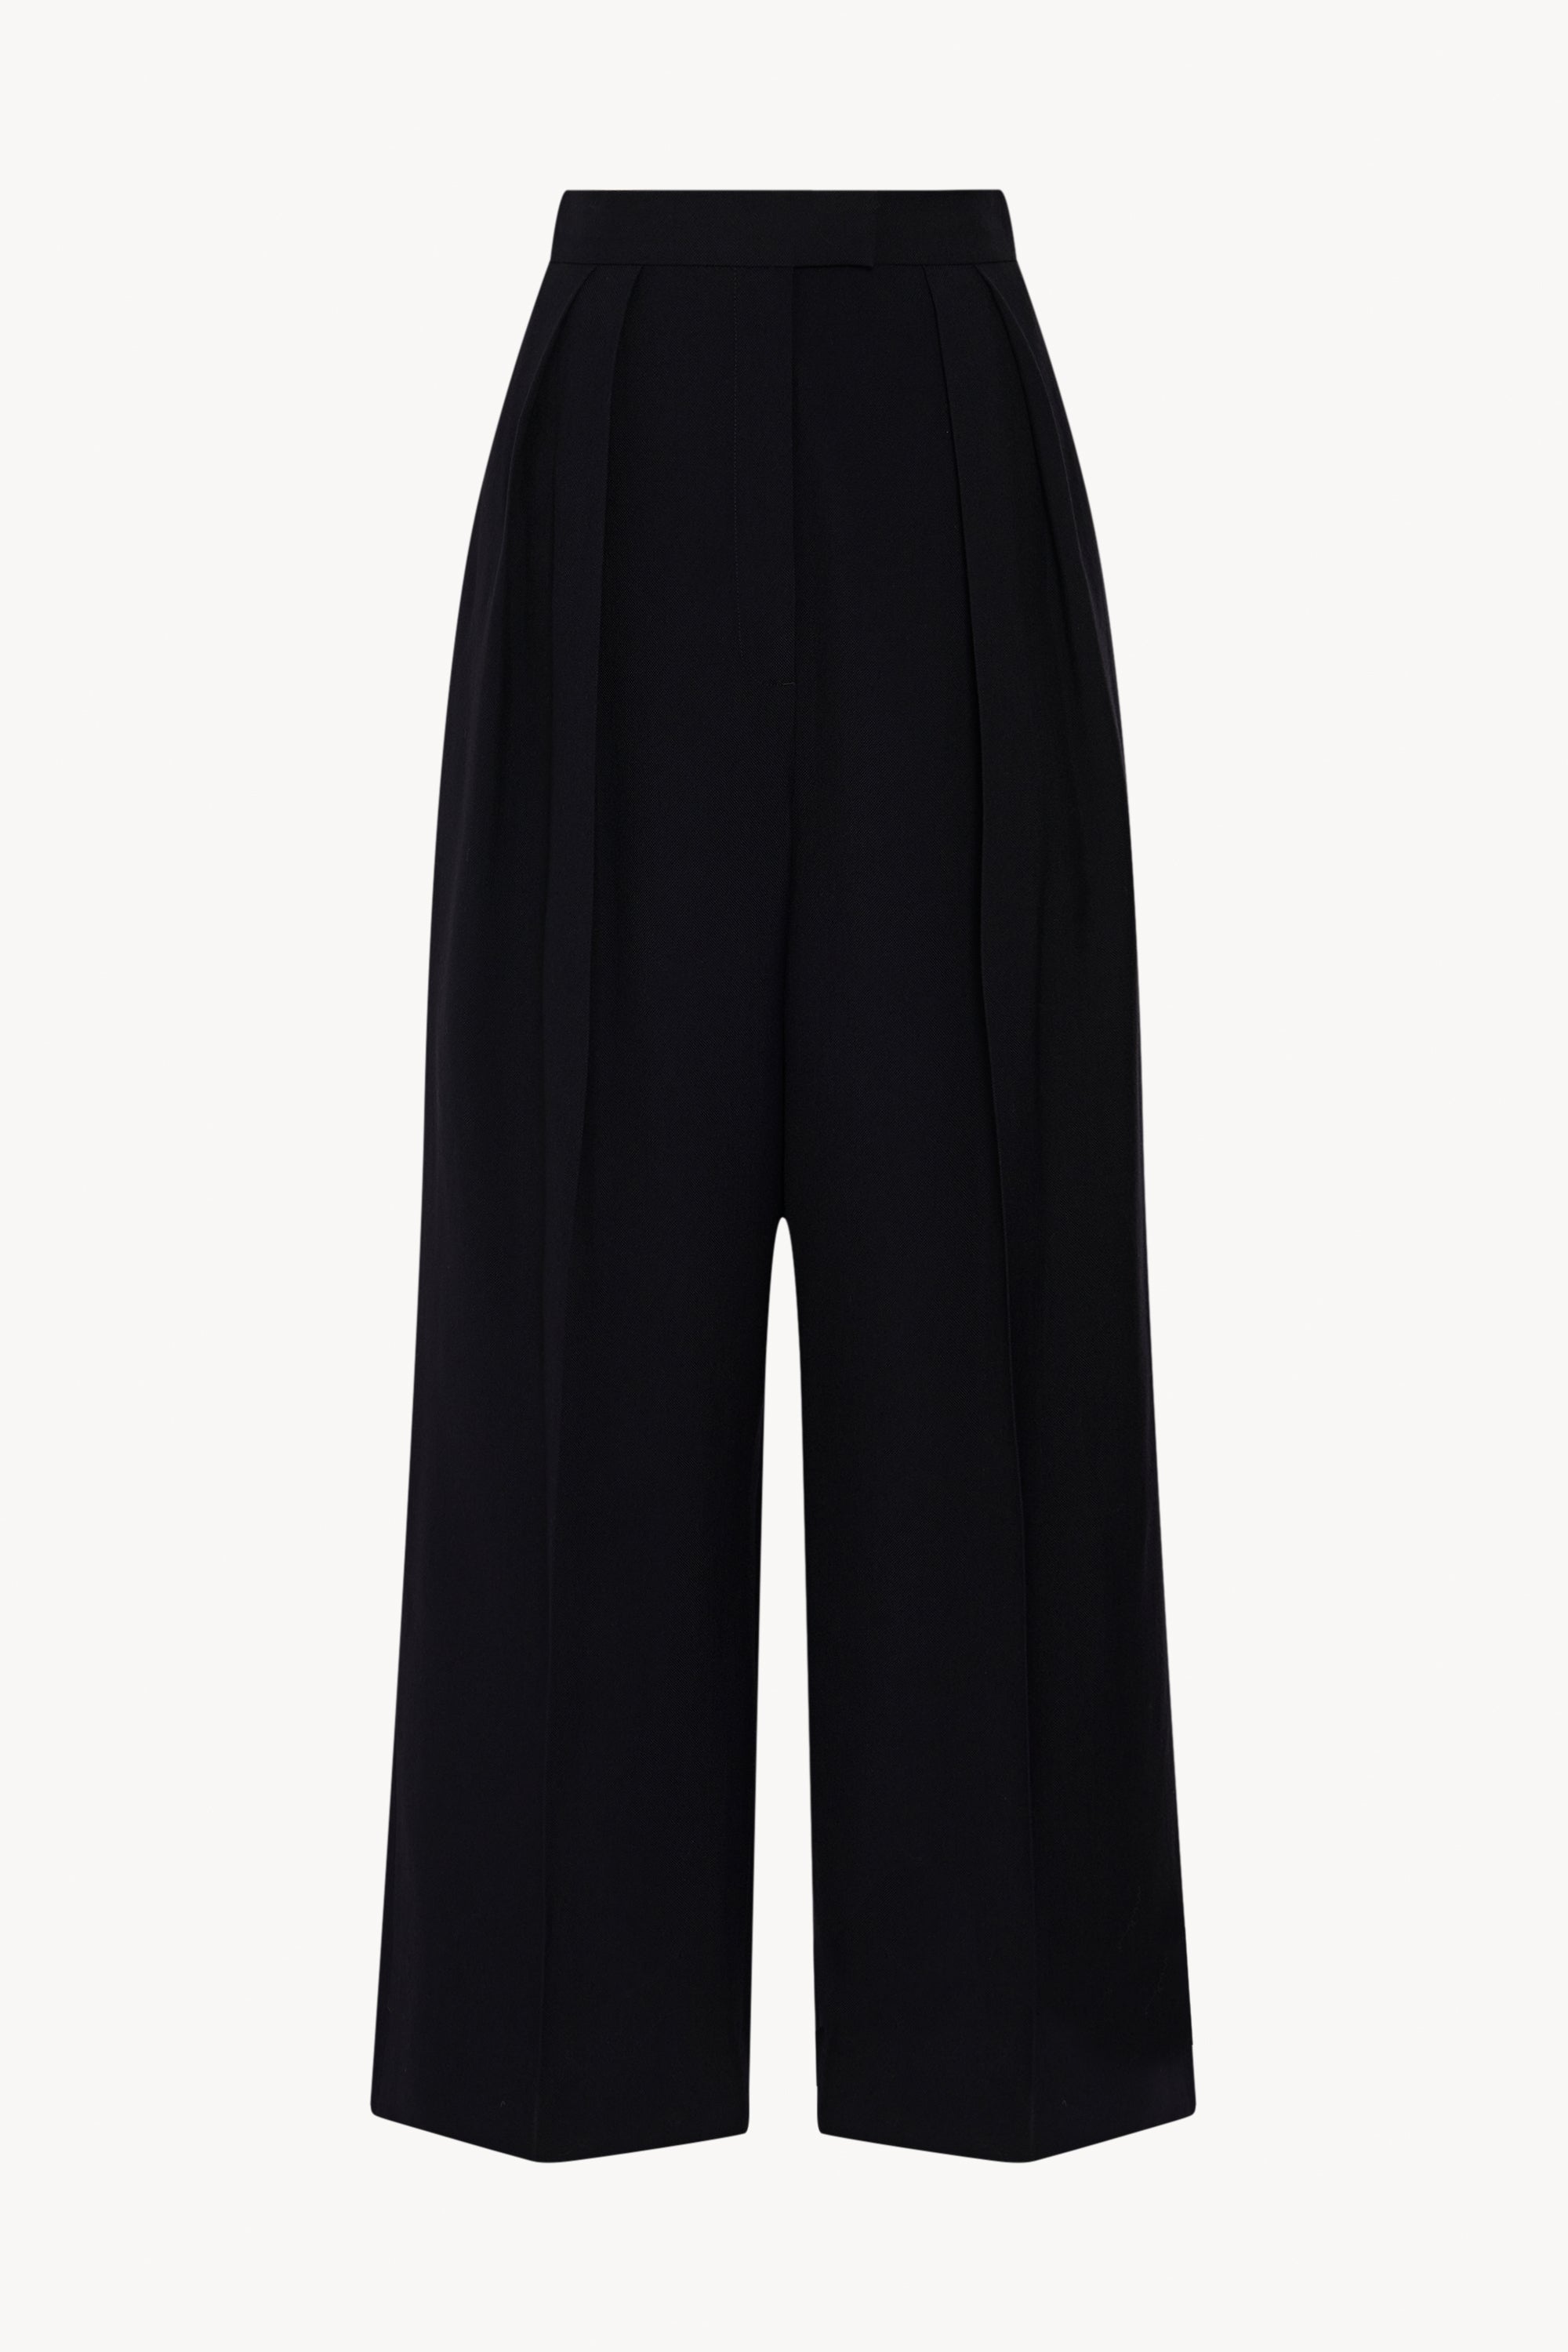 crissi-pant-blue-in-viscose-and-virgin-wool-the-row